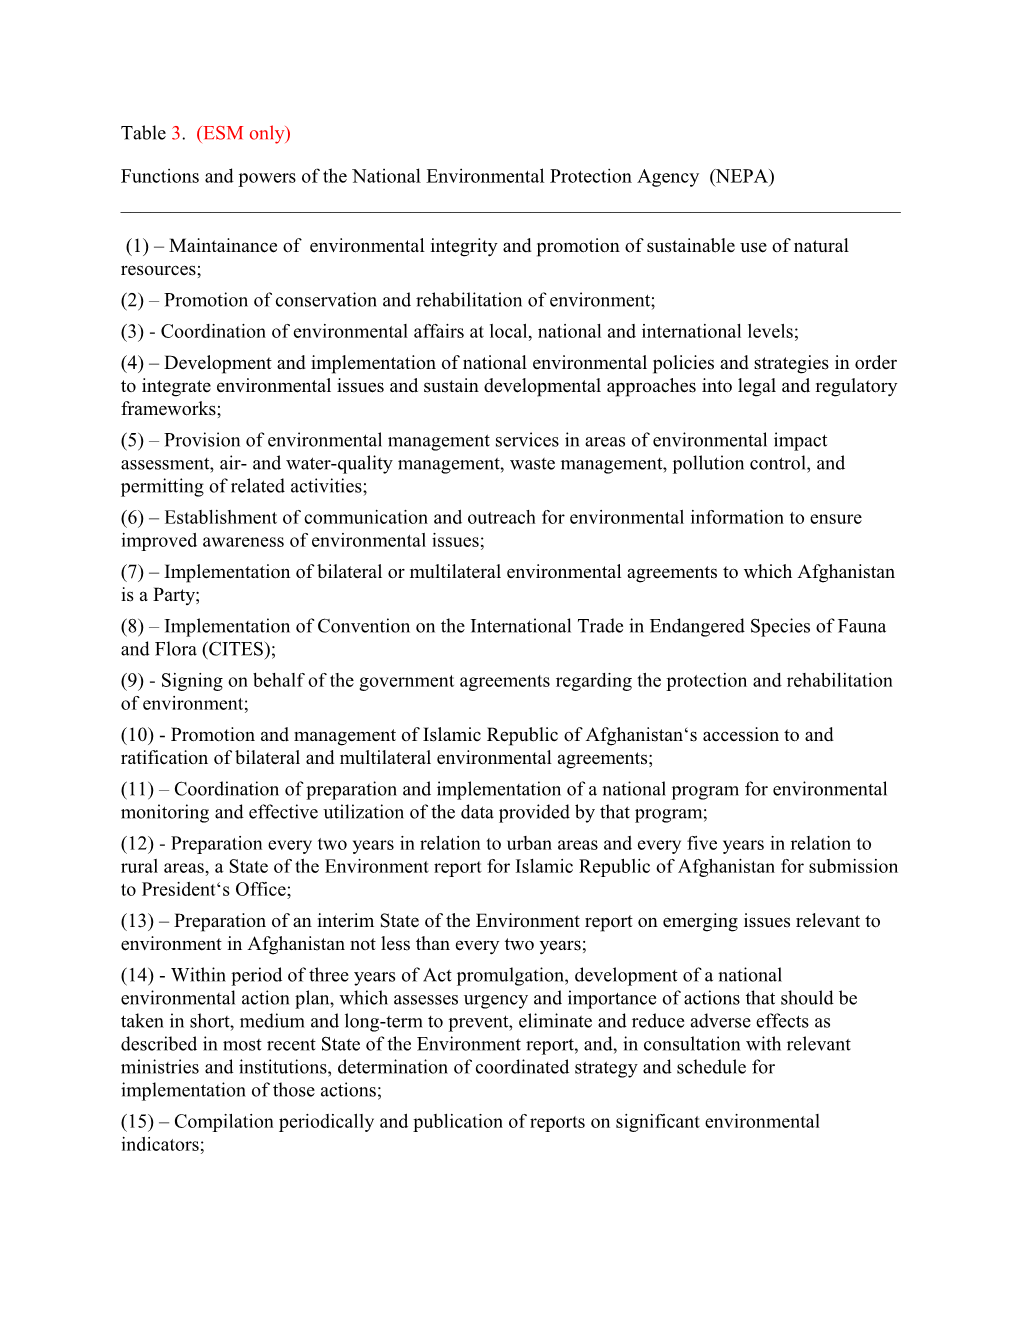 Functions and Powers of the National Environmental Protection Agency (NEPA) ______